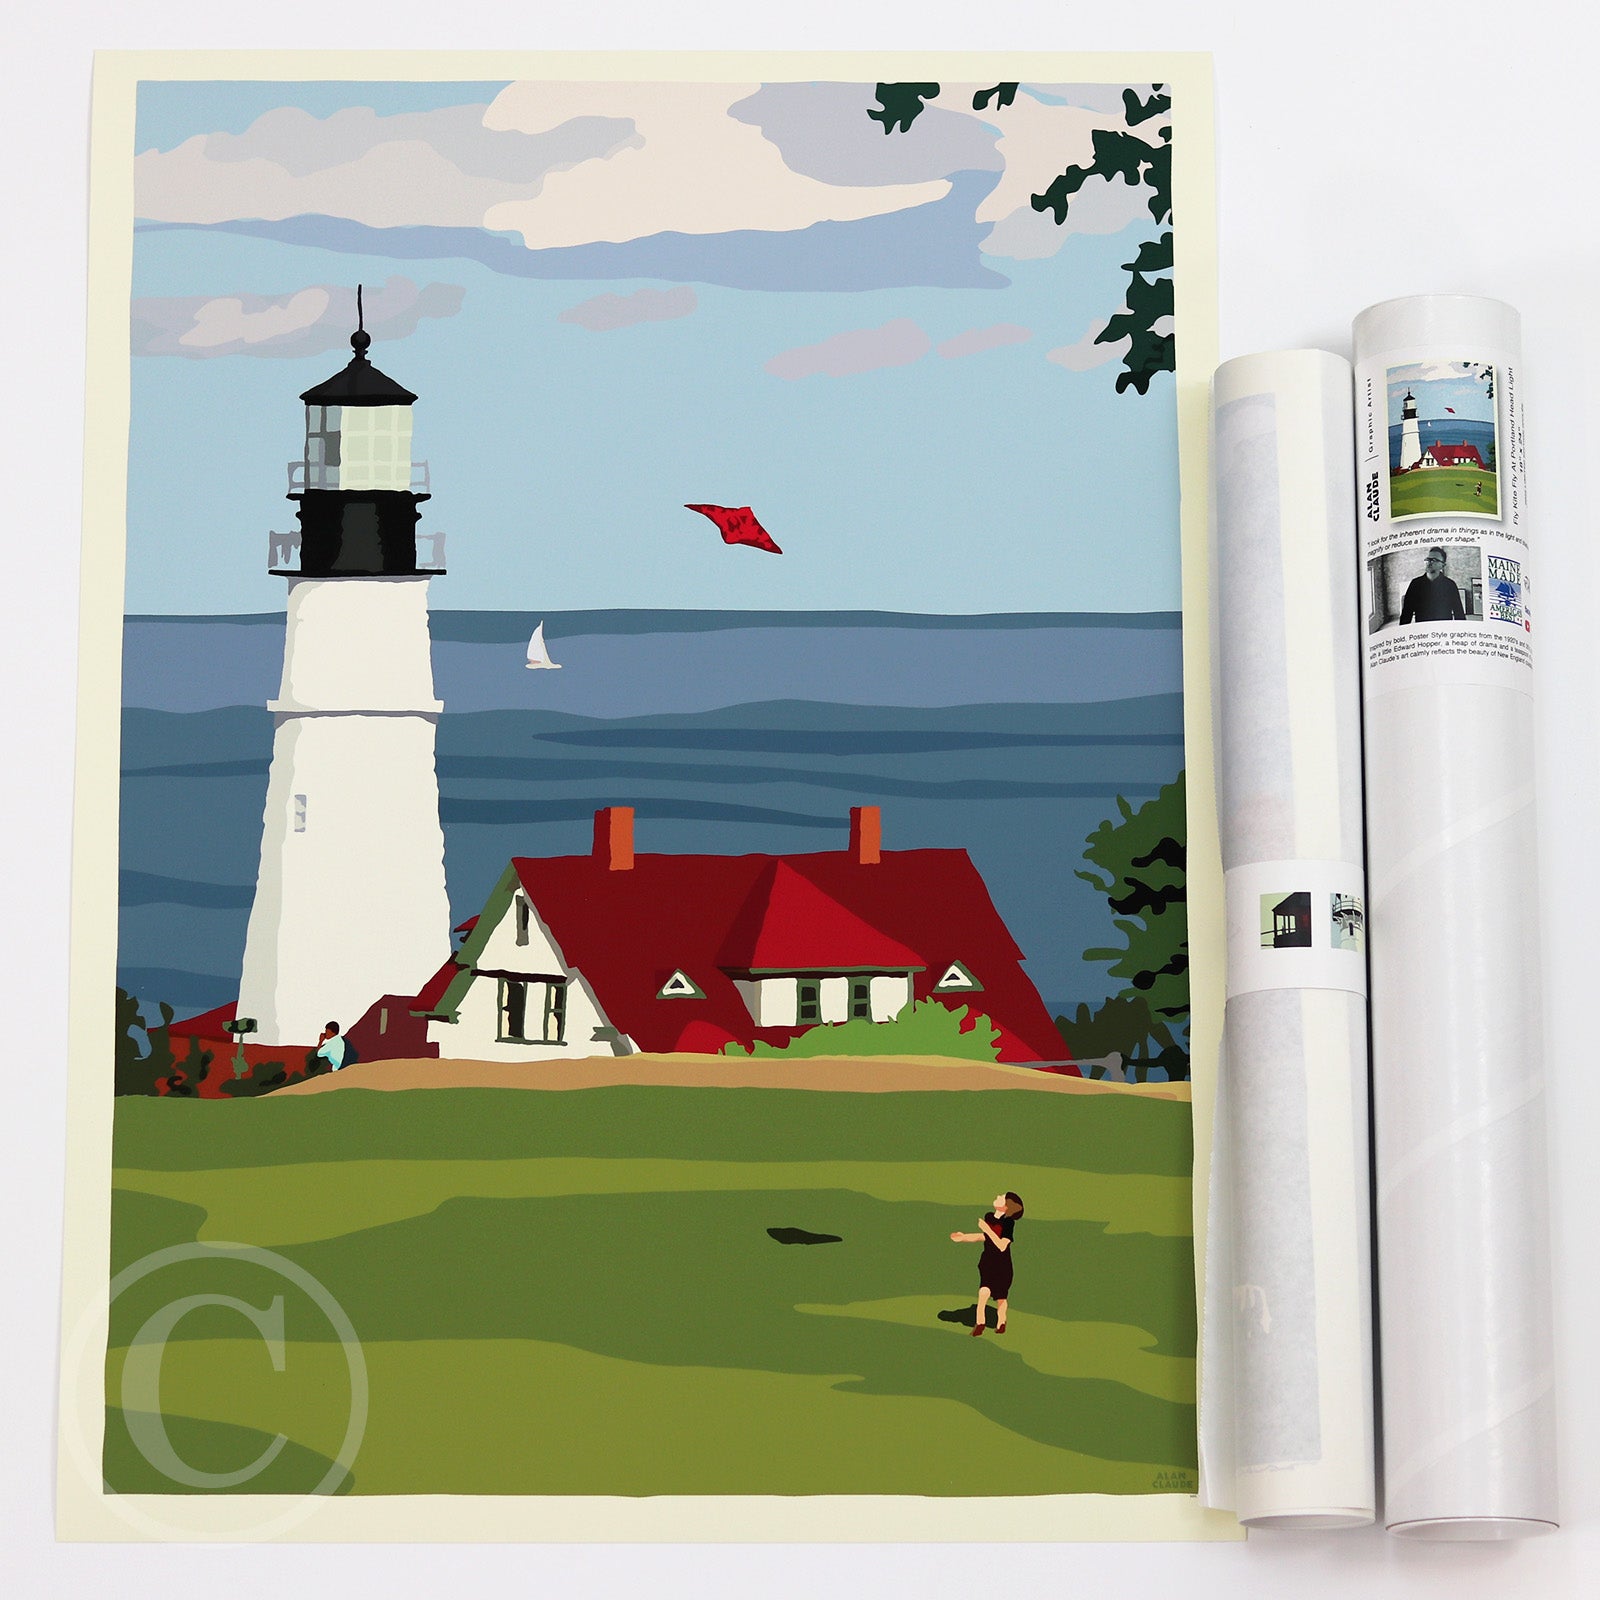 Fly Kite Fly at Portland Head Light Art Print 18" x 24" Wall Poster By Alan Claude - Maine